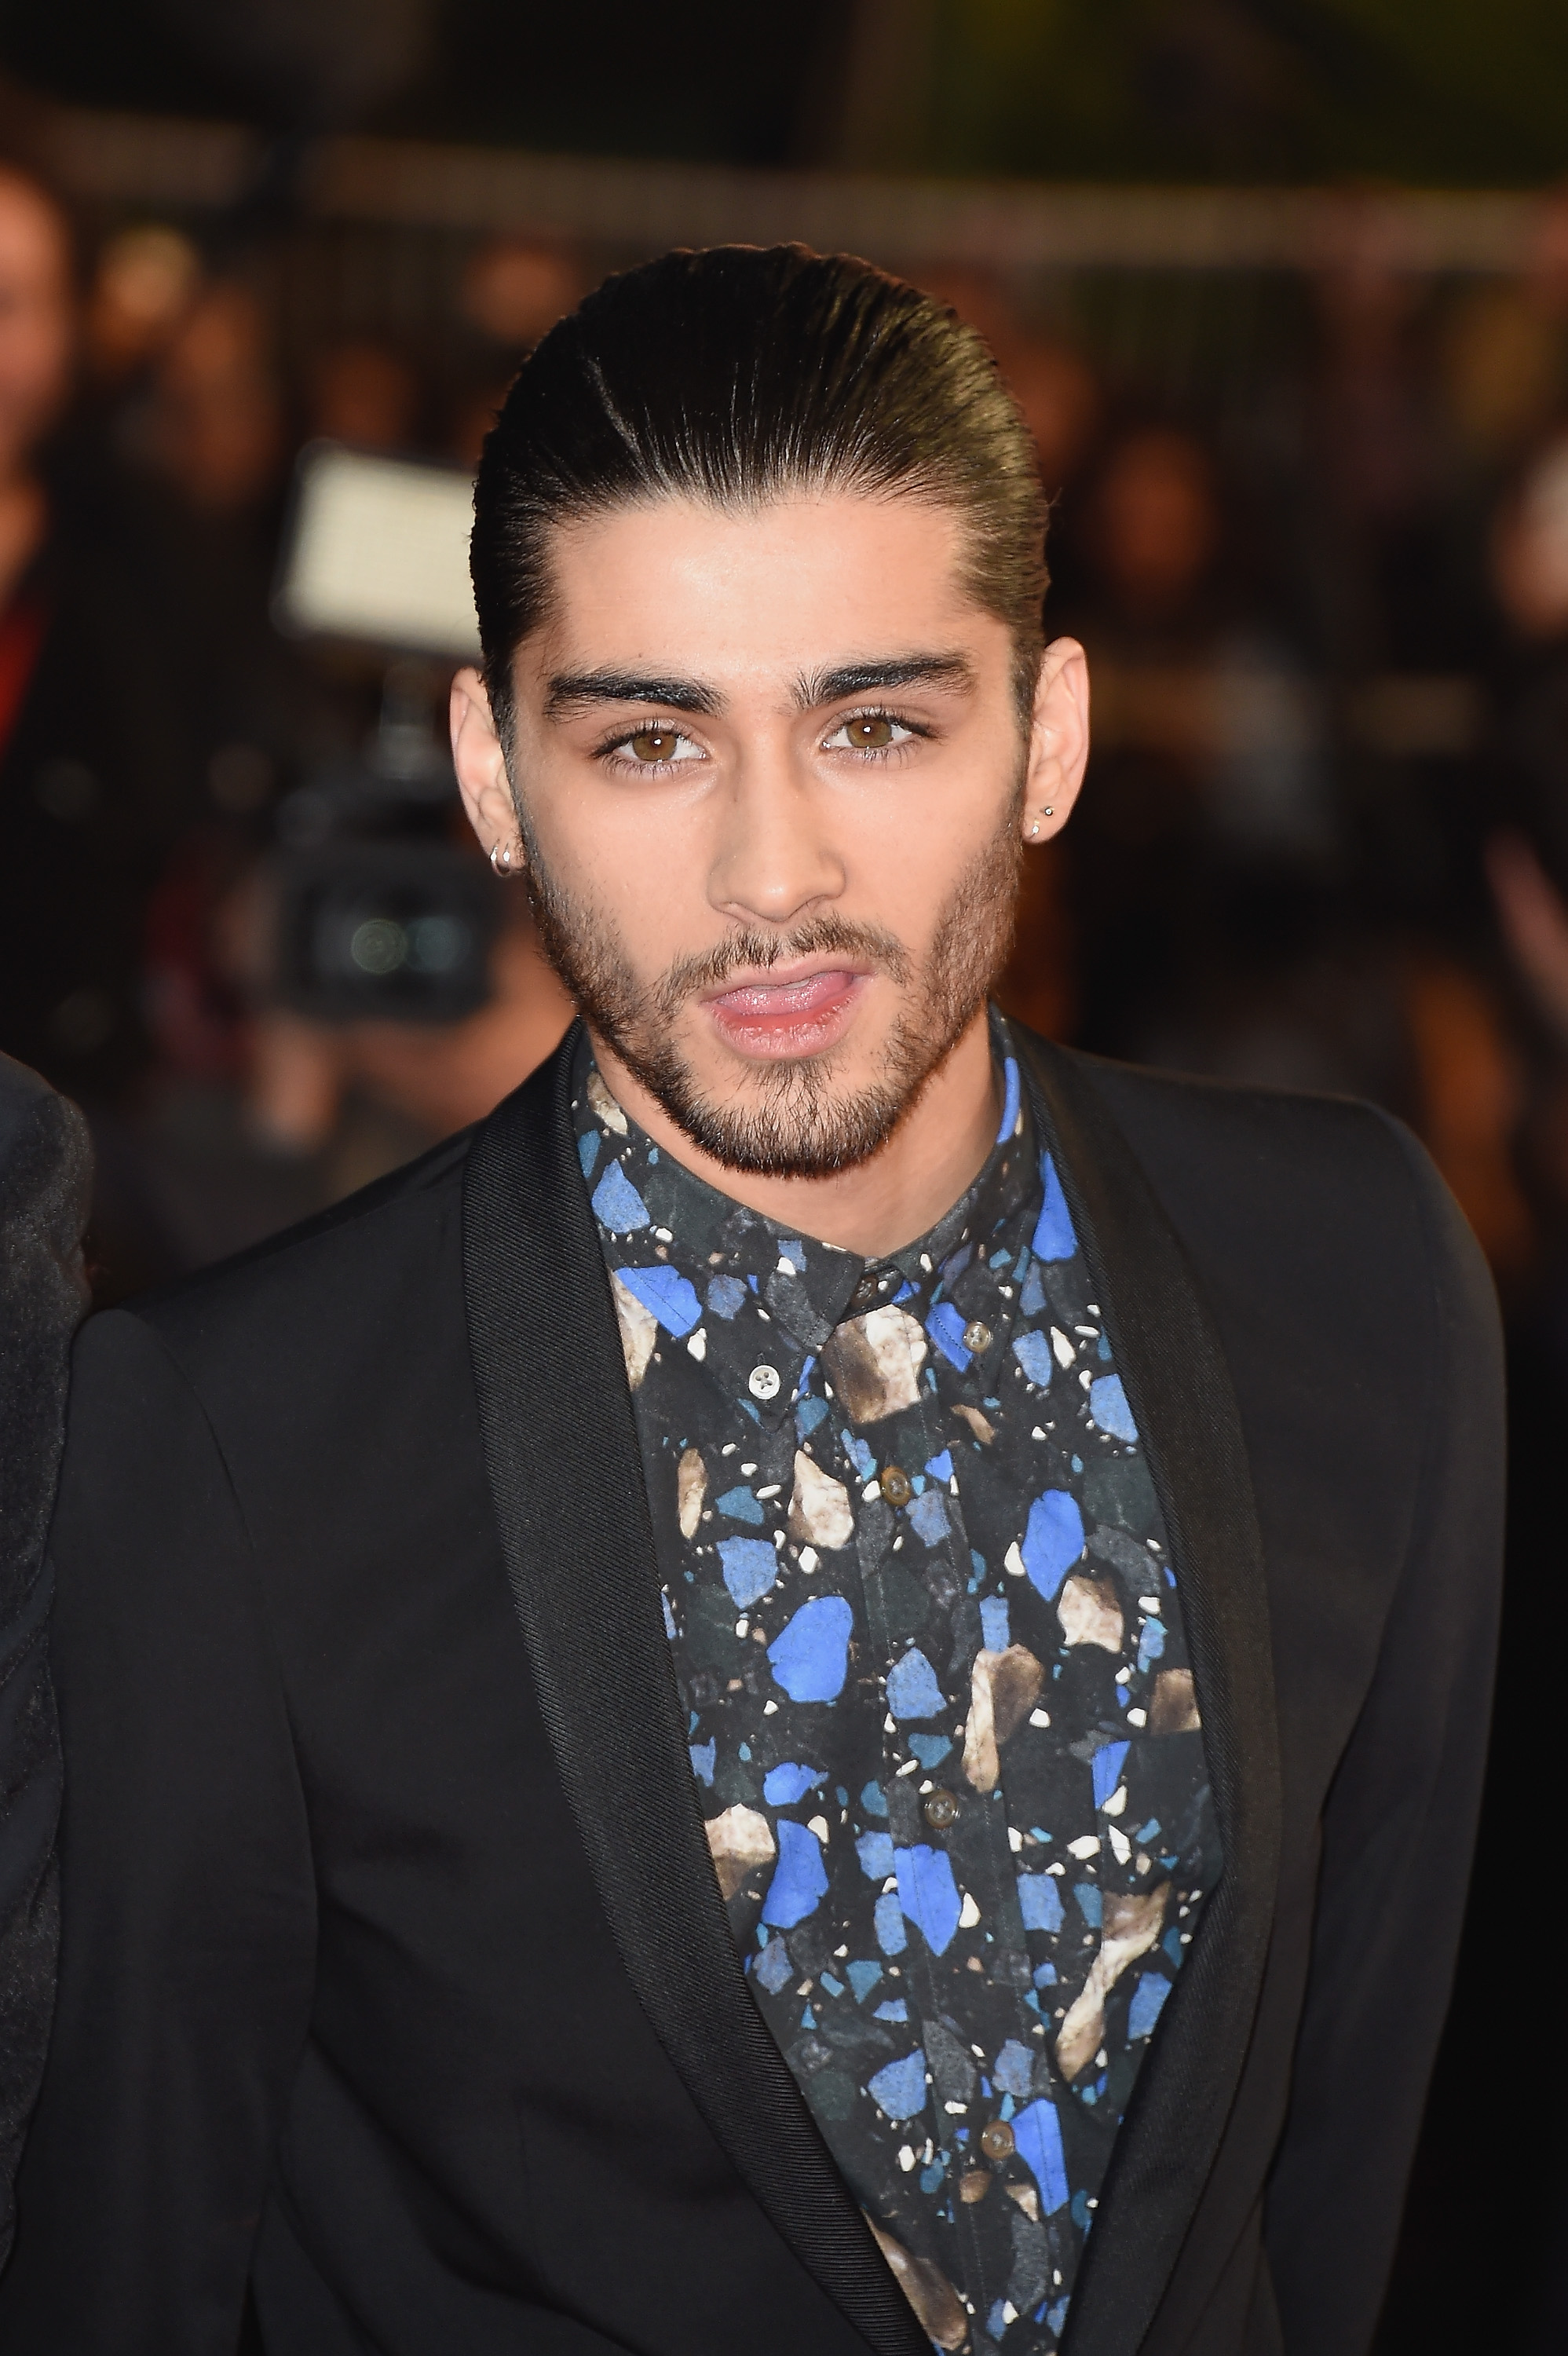 Zayn Malik attends the NRJ Music Awards on Dec. 13, 2014 in Cannes, France. (Pascal Le Segretain—Getty Images)